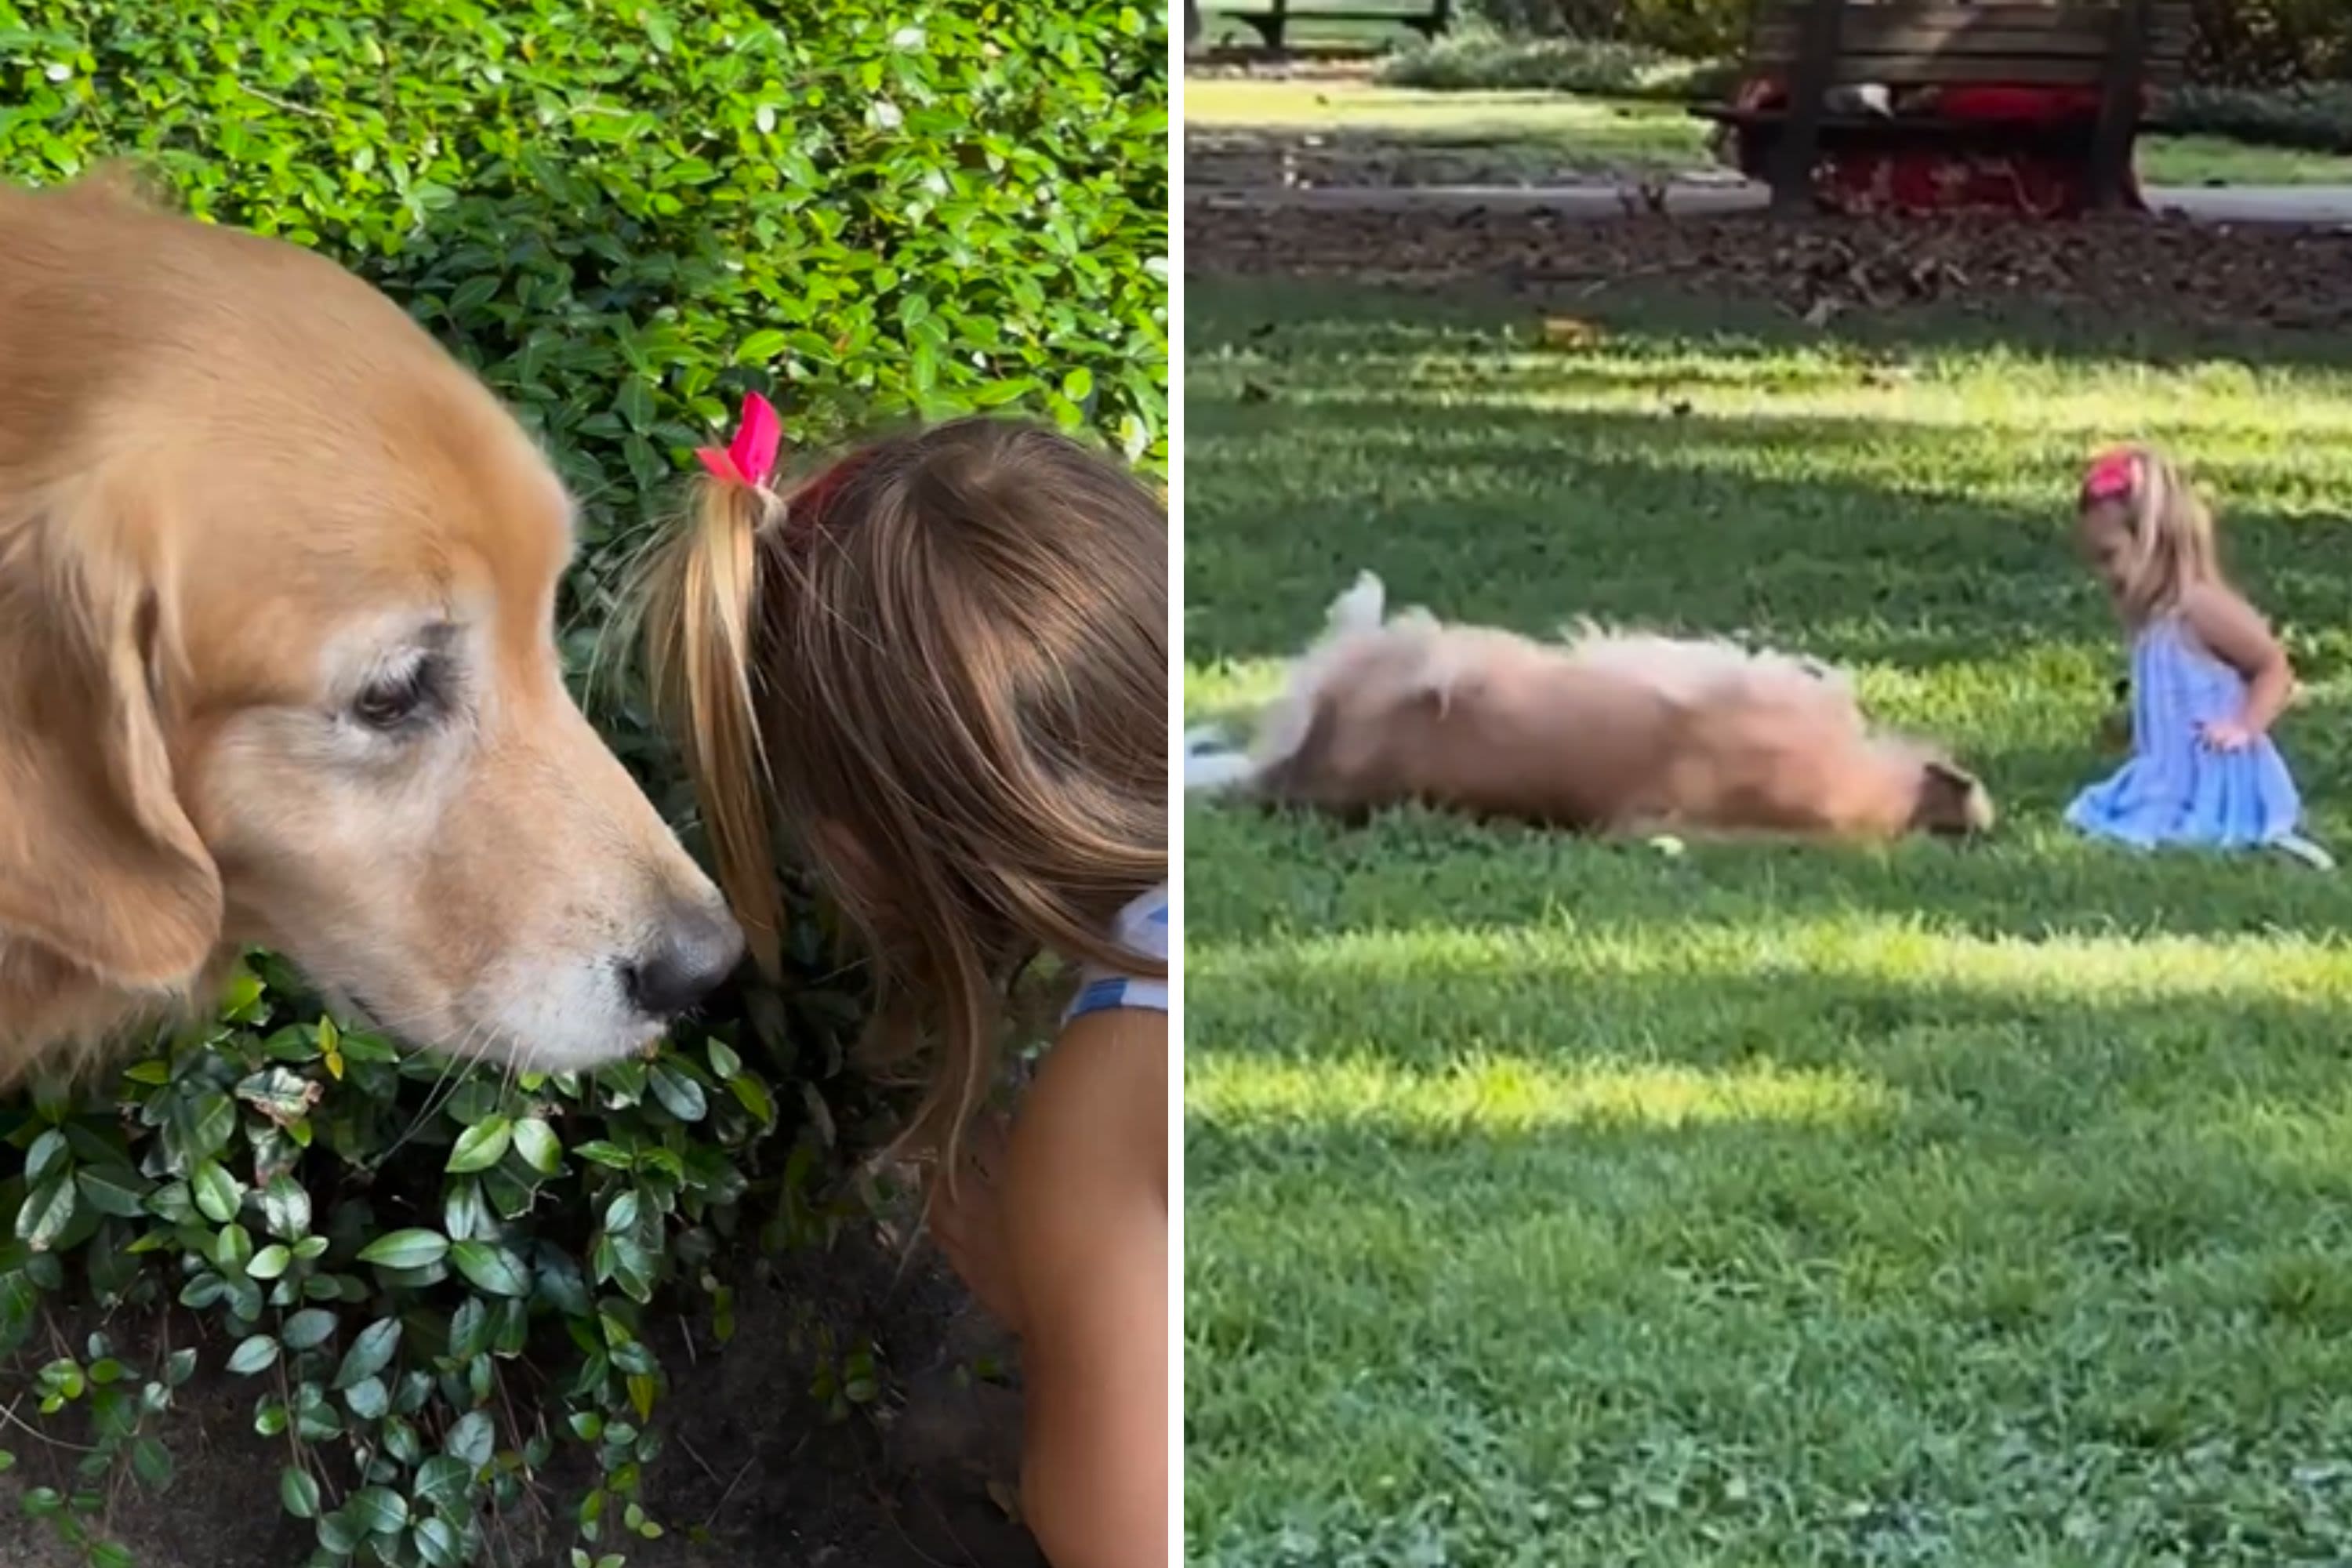 Little girl plays follow the leader with golden retriever, delights viewers